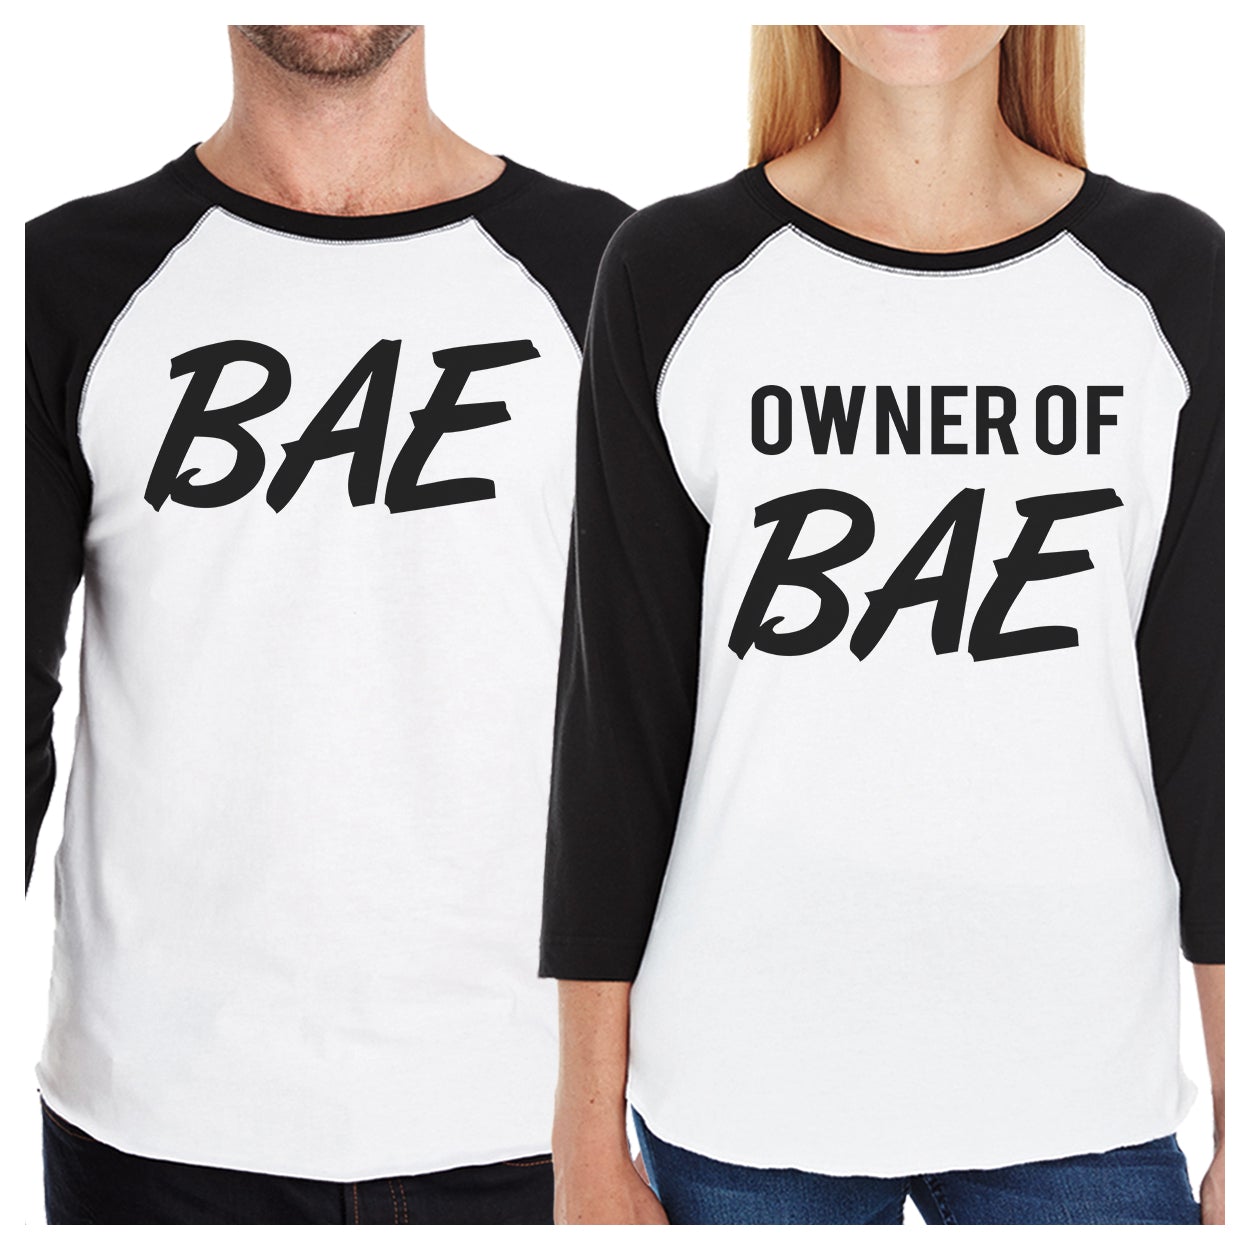 Bae And Owner Of Bae Matching Couple Black And White Baseball Shirts